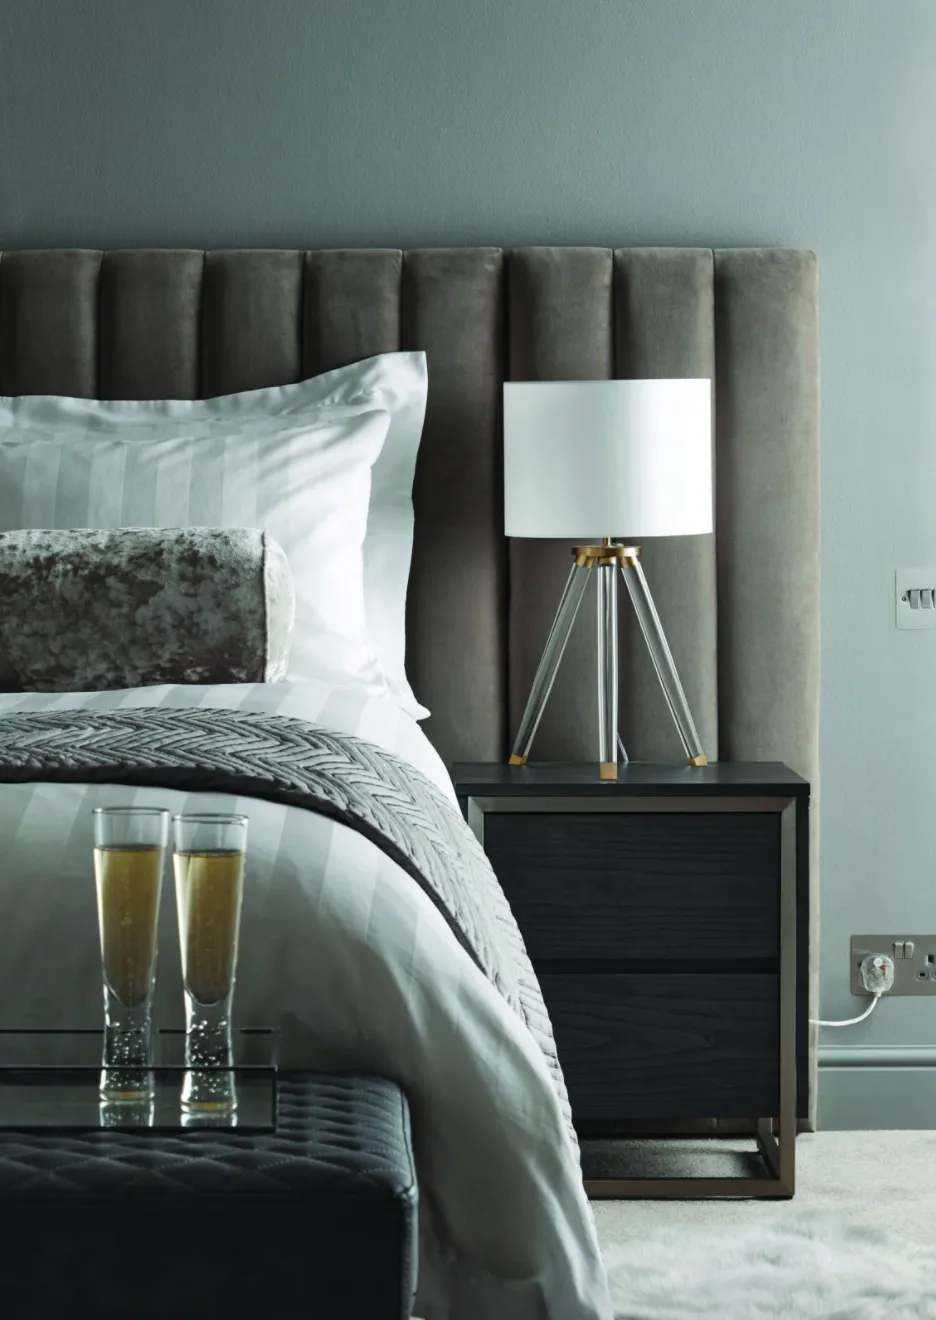 Fluted finishes are forever associated with art deco glamour, instantly creating a luxurious look in your home Oversized Hotel headboard, from £199; Hotel Finley tripod table lamp in silver, £45; Logan bedside table, £169; Hotel Egyptian cotton silver stripe duvet cover, from £25; Hotel Bubble stem flute glasses, £18 for a set of four, all Dunelm